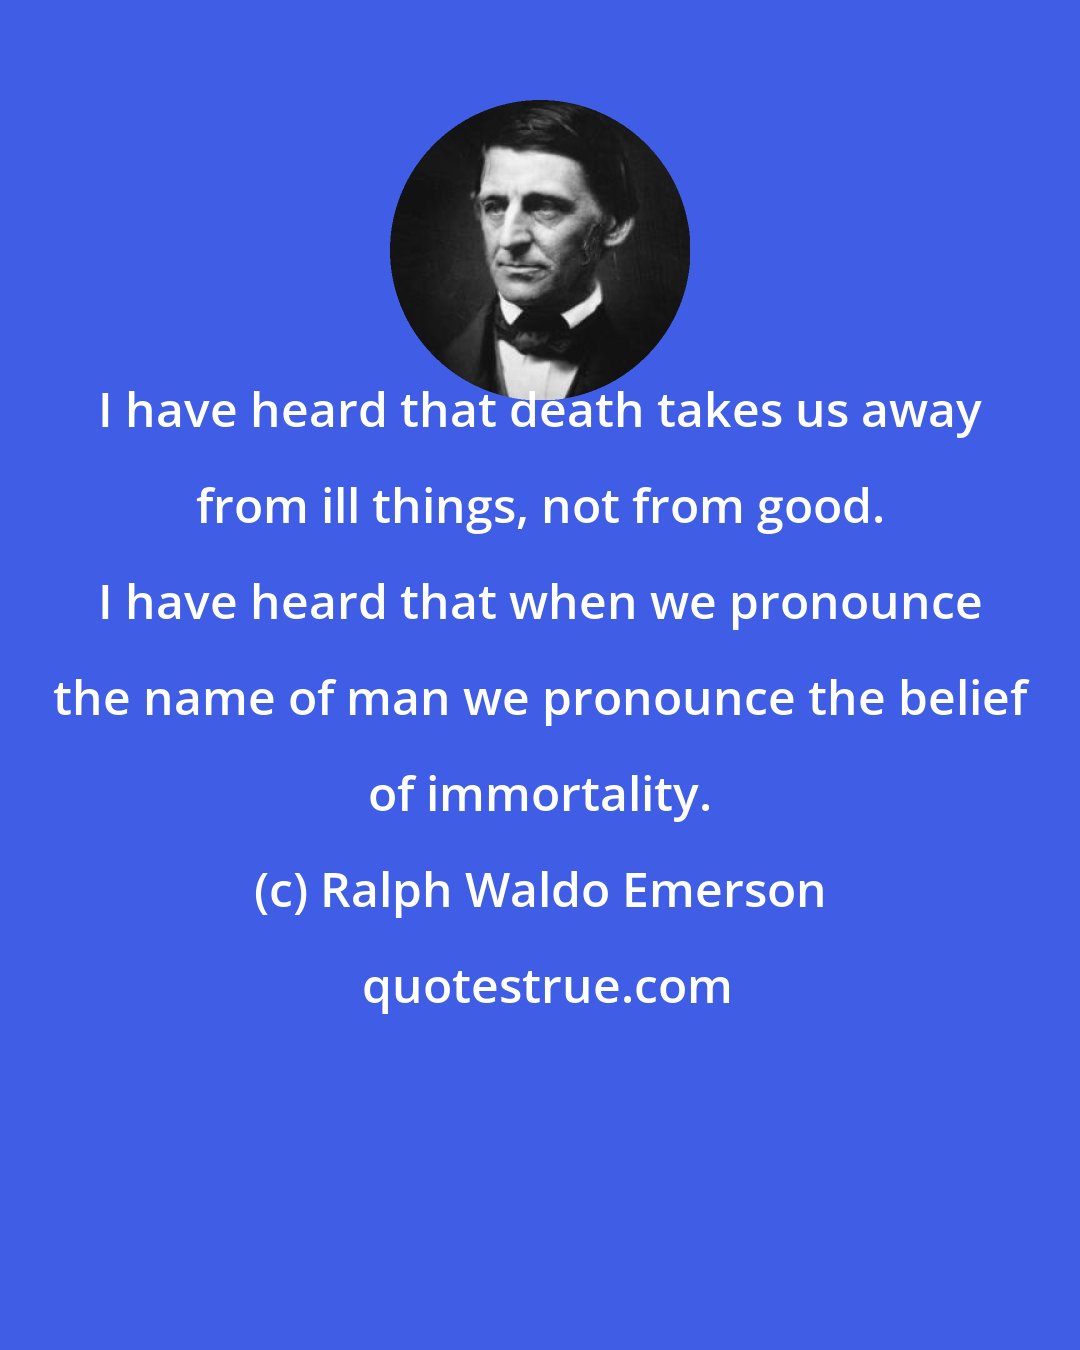 Ralph Waldo Emerson: I have heard that death takes us away from ill things, not from good. I have heard that when we pronounce the name of man we pronounce the belief of immortality.